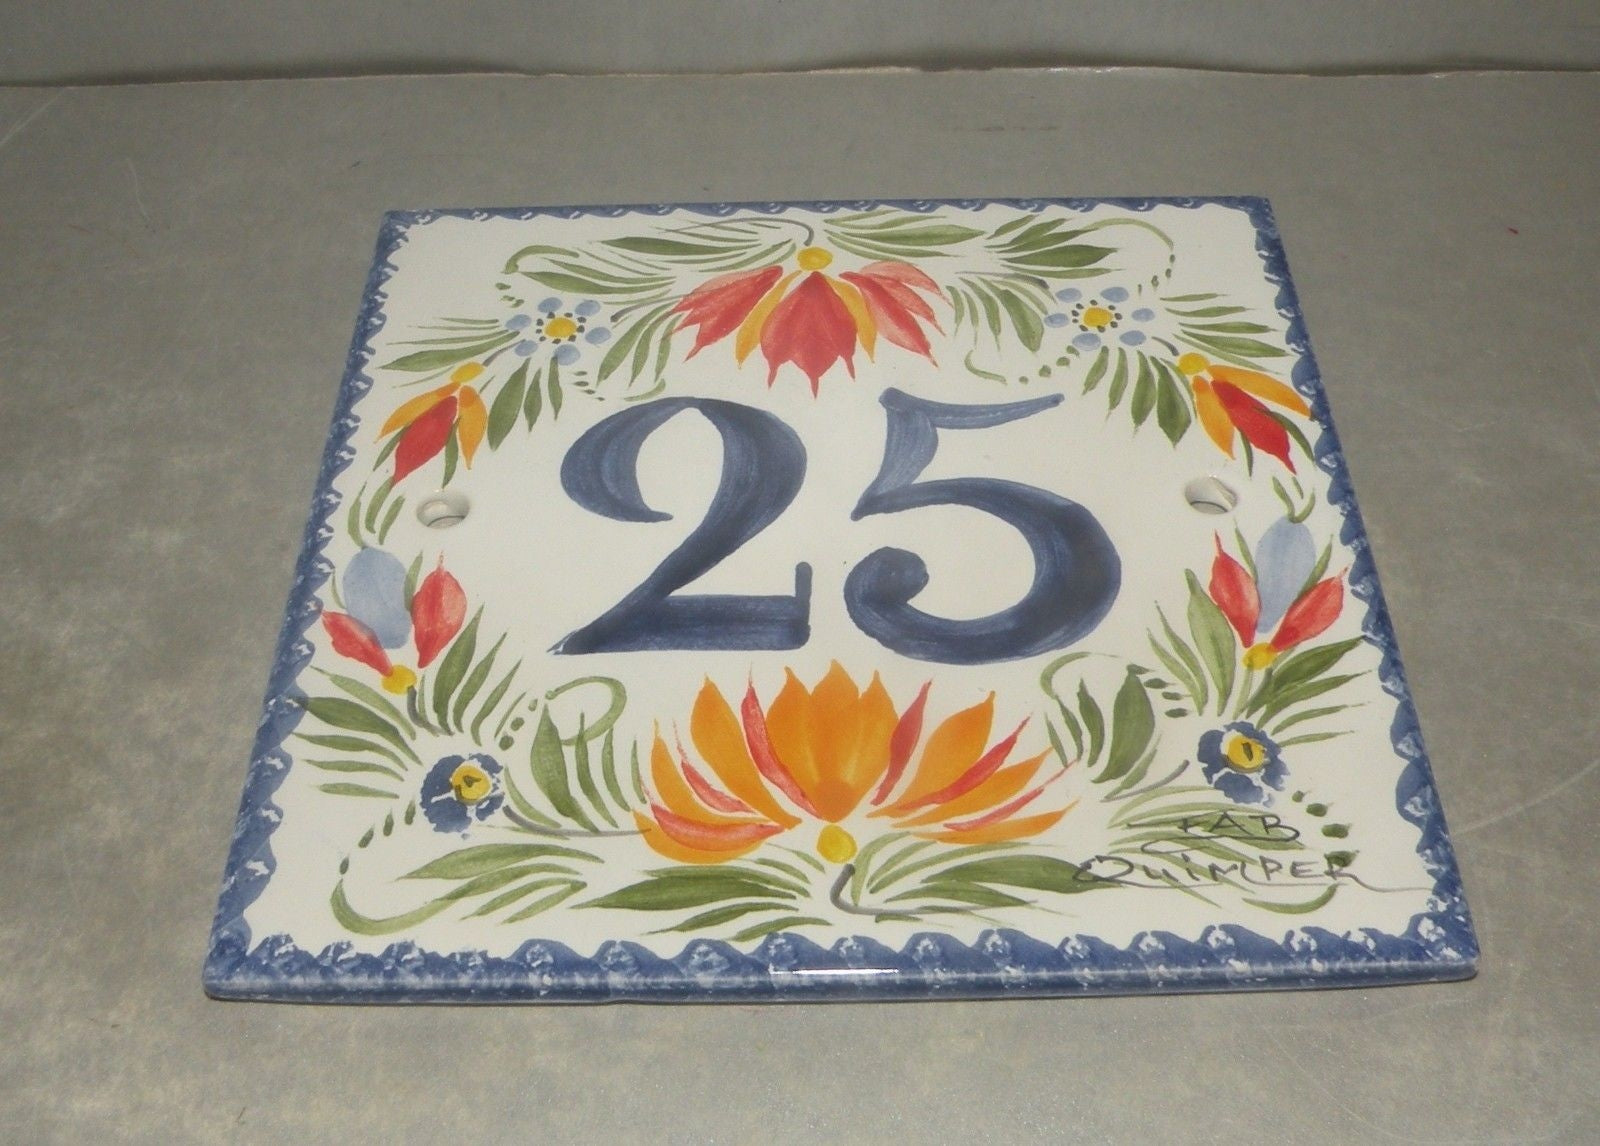 Wall Tile with the number 25 , FAB Quimper